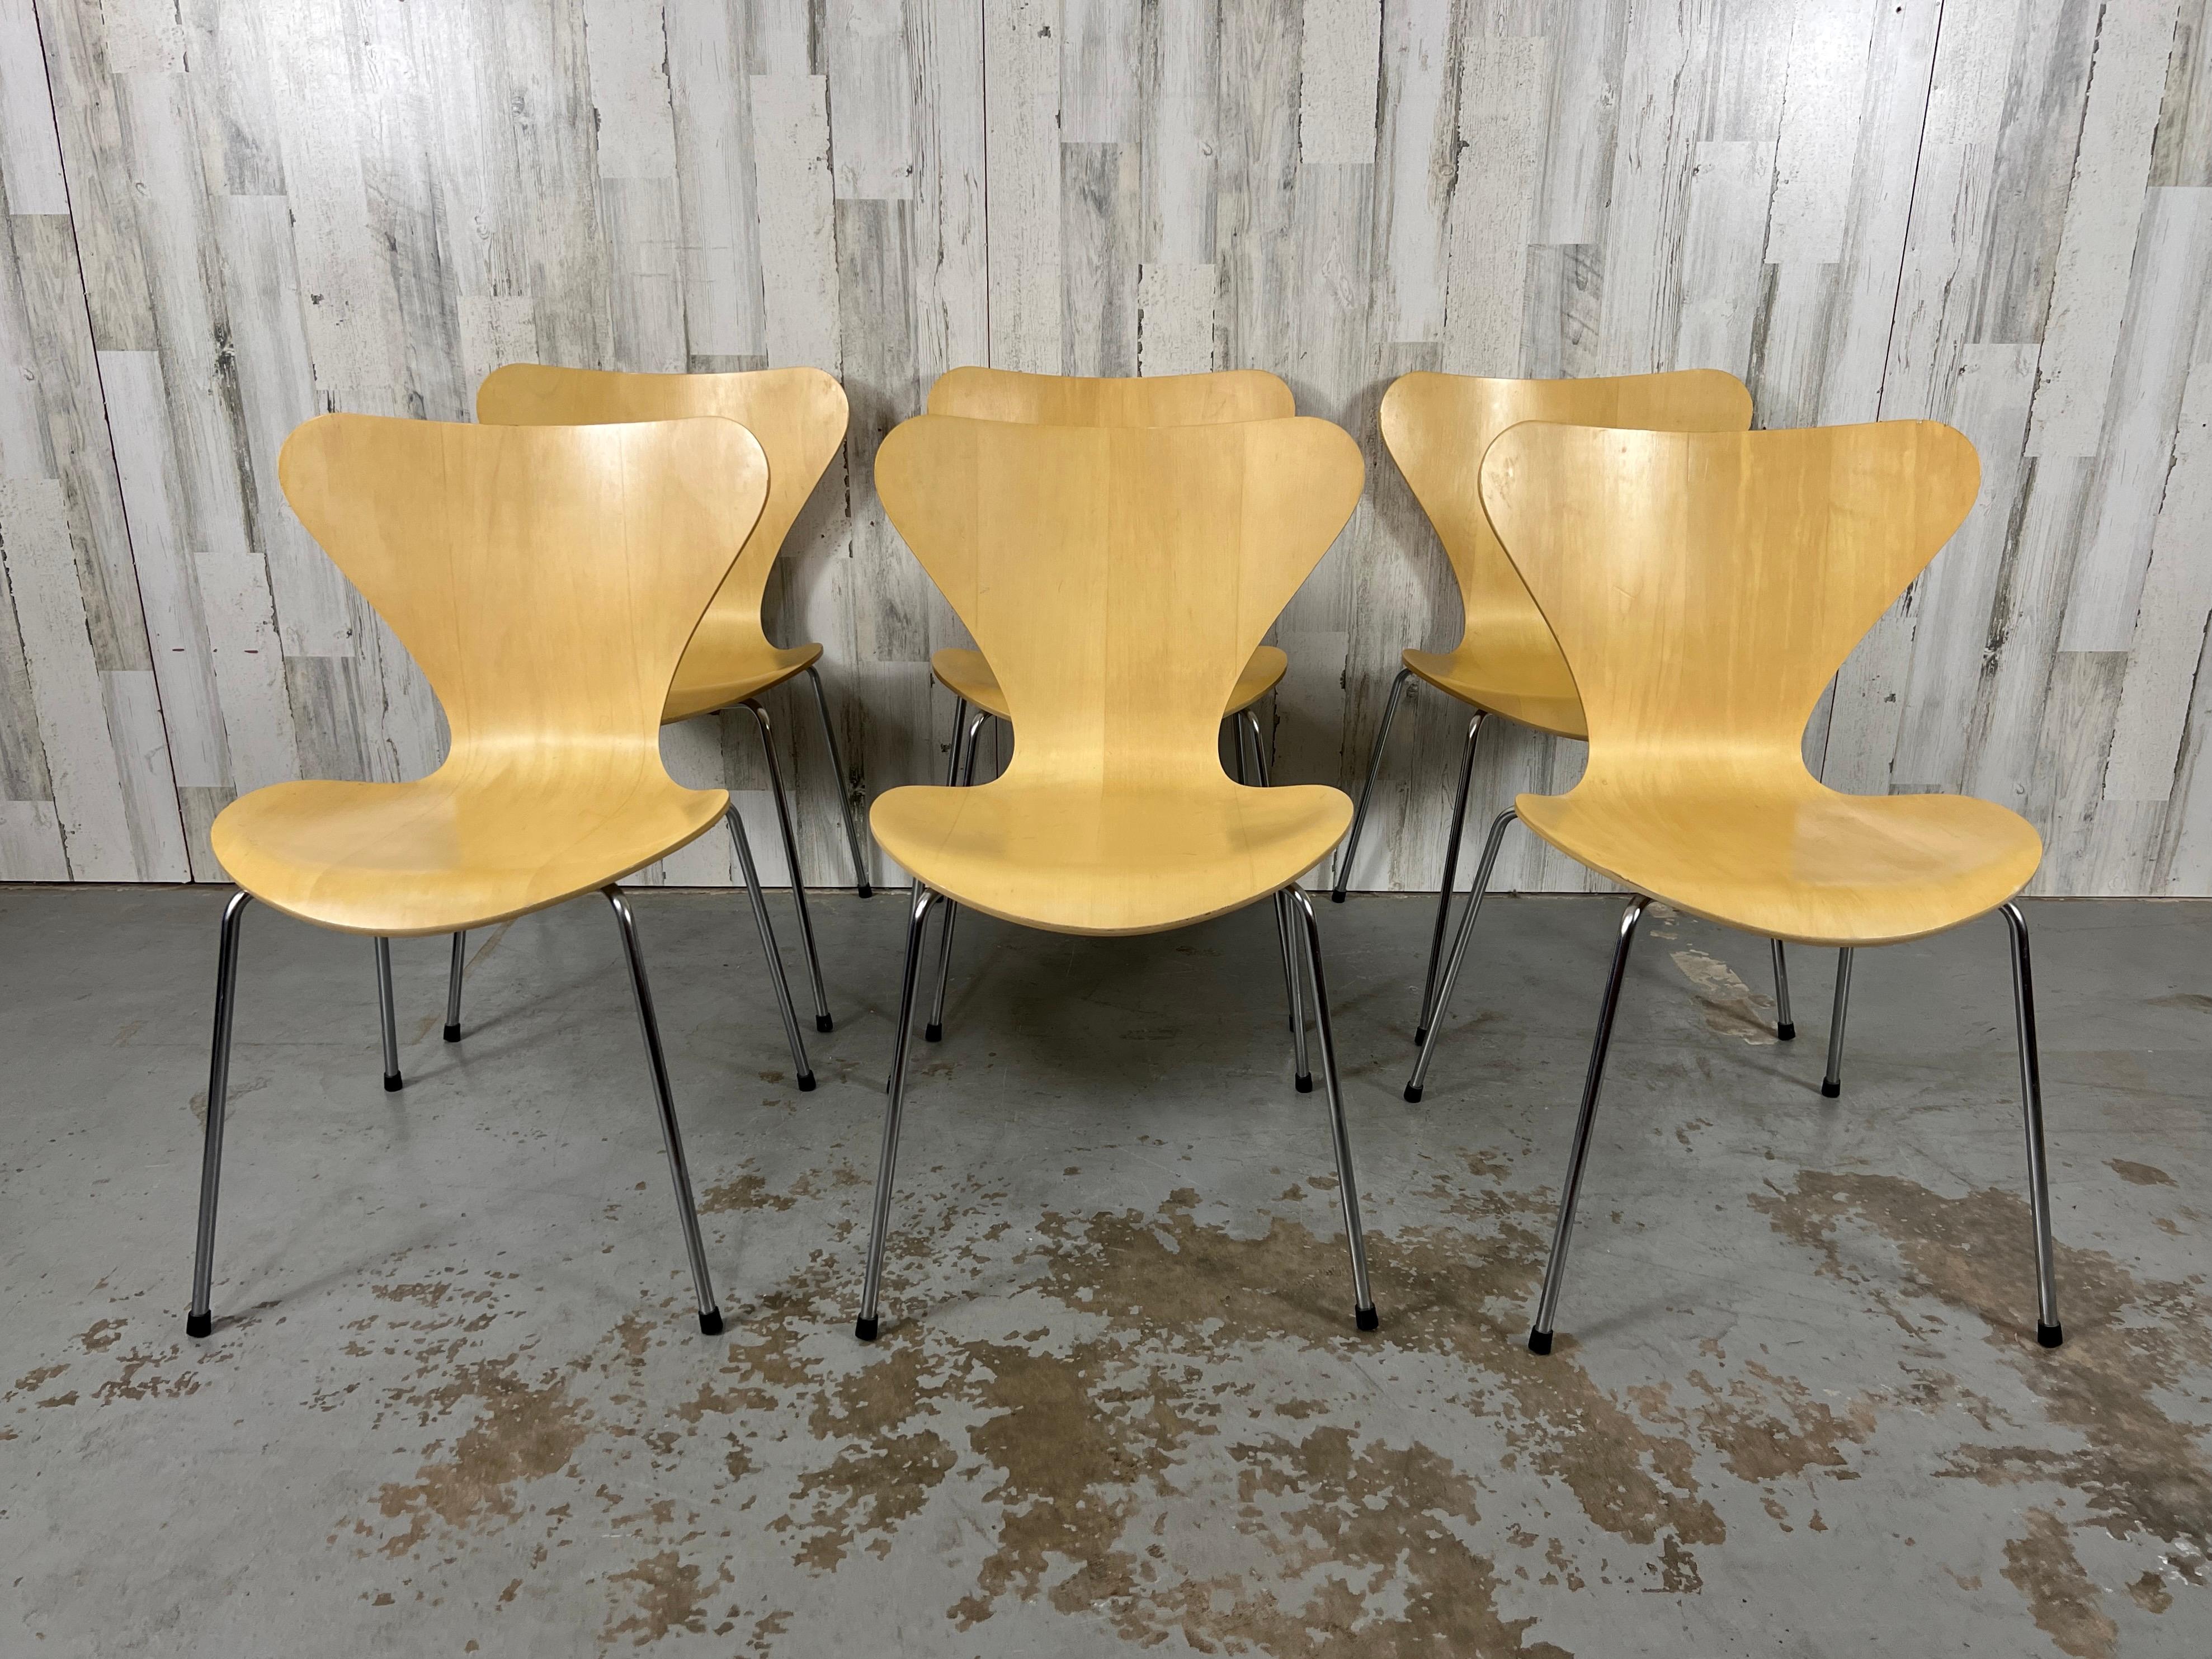 Iconic Arne Jacobsen series 7 stackable natural beech wood chairs for Fritz Hansen. The lean, stackable chair updates Jacobsen’s simple and spare 1952 Ant chair.